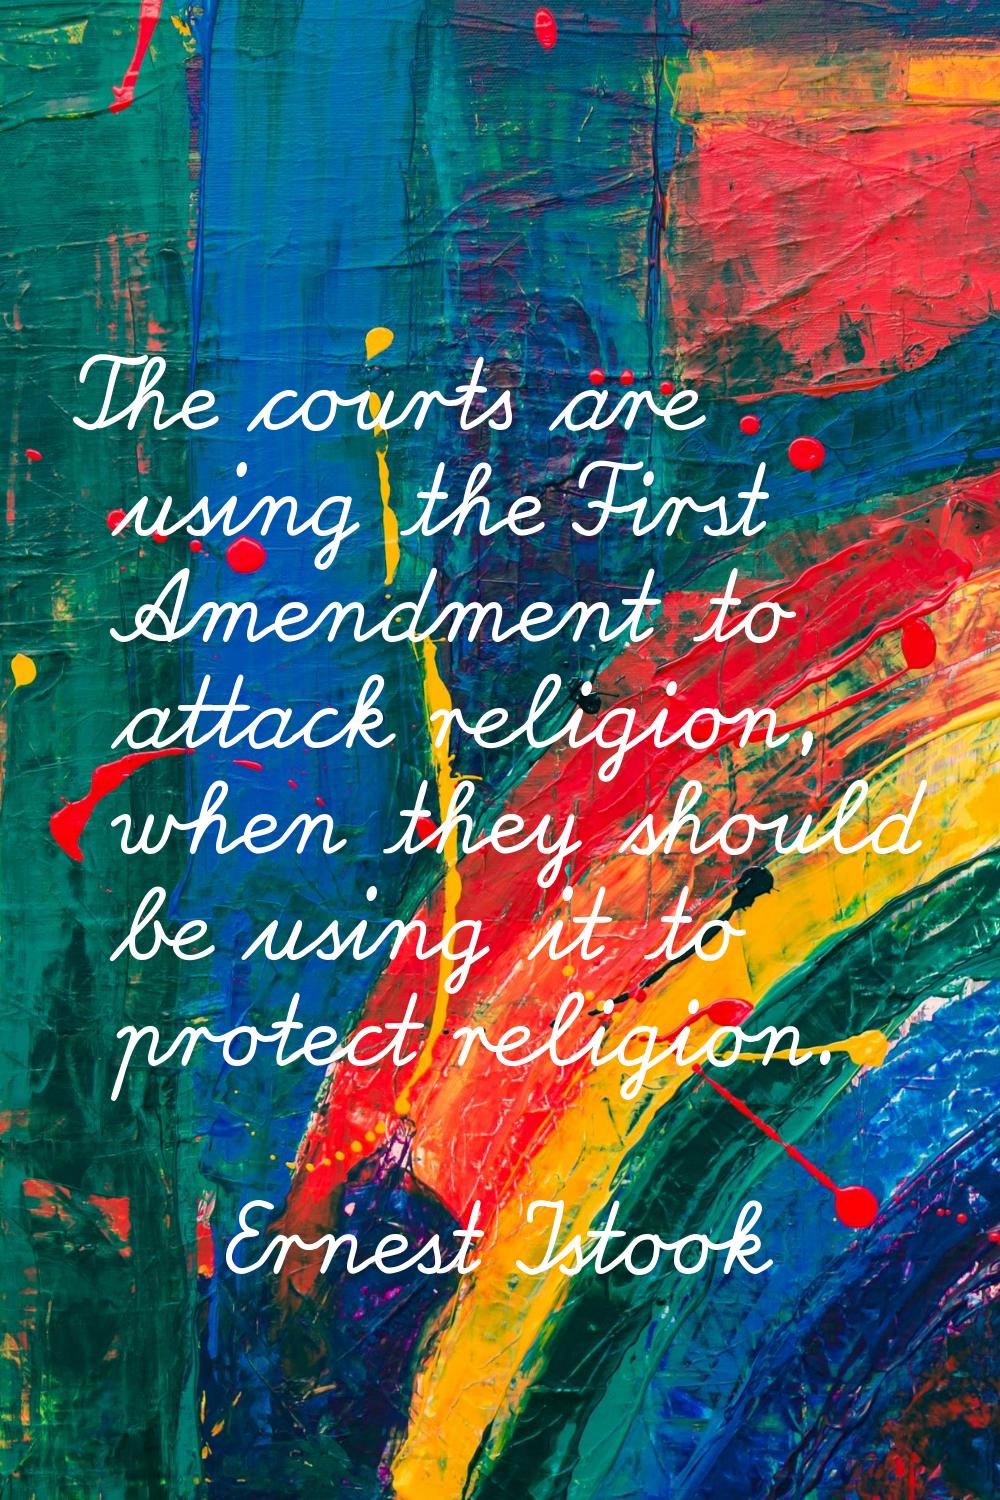 The courts are using the First Amendment to attack religion, when they should be using it to protec